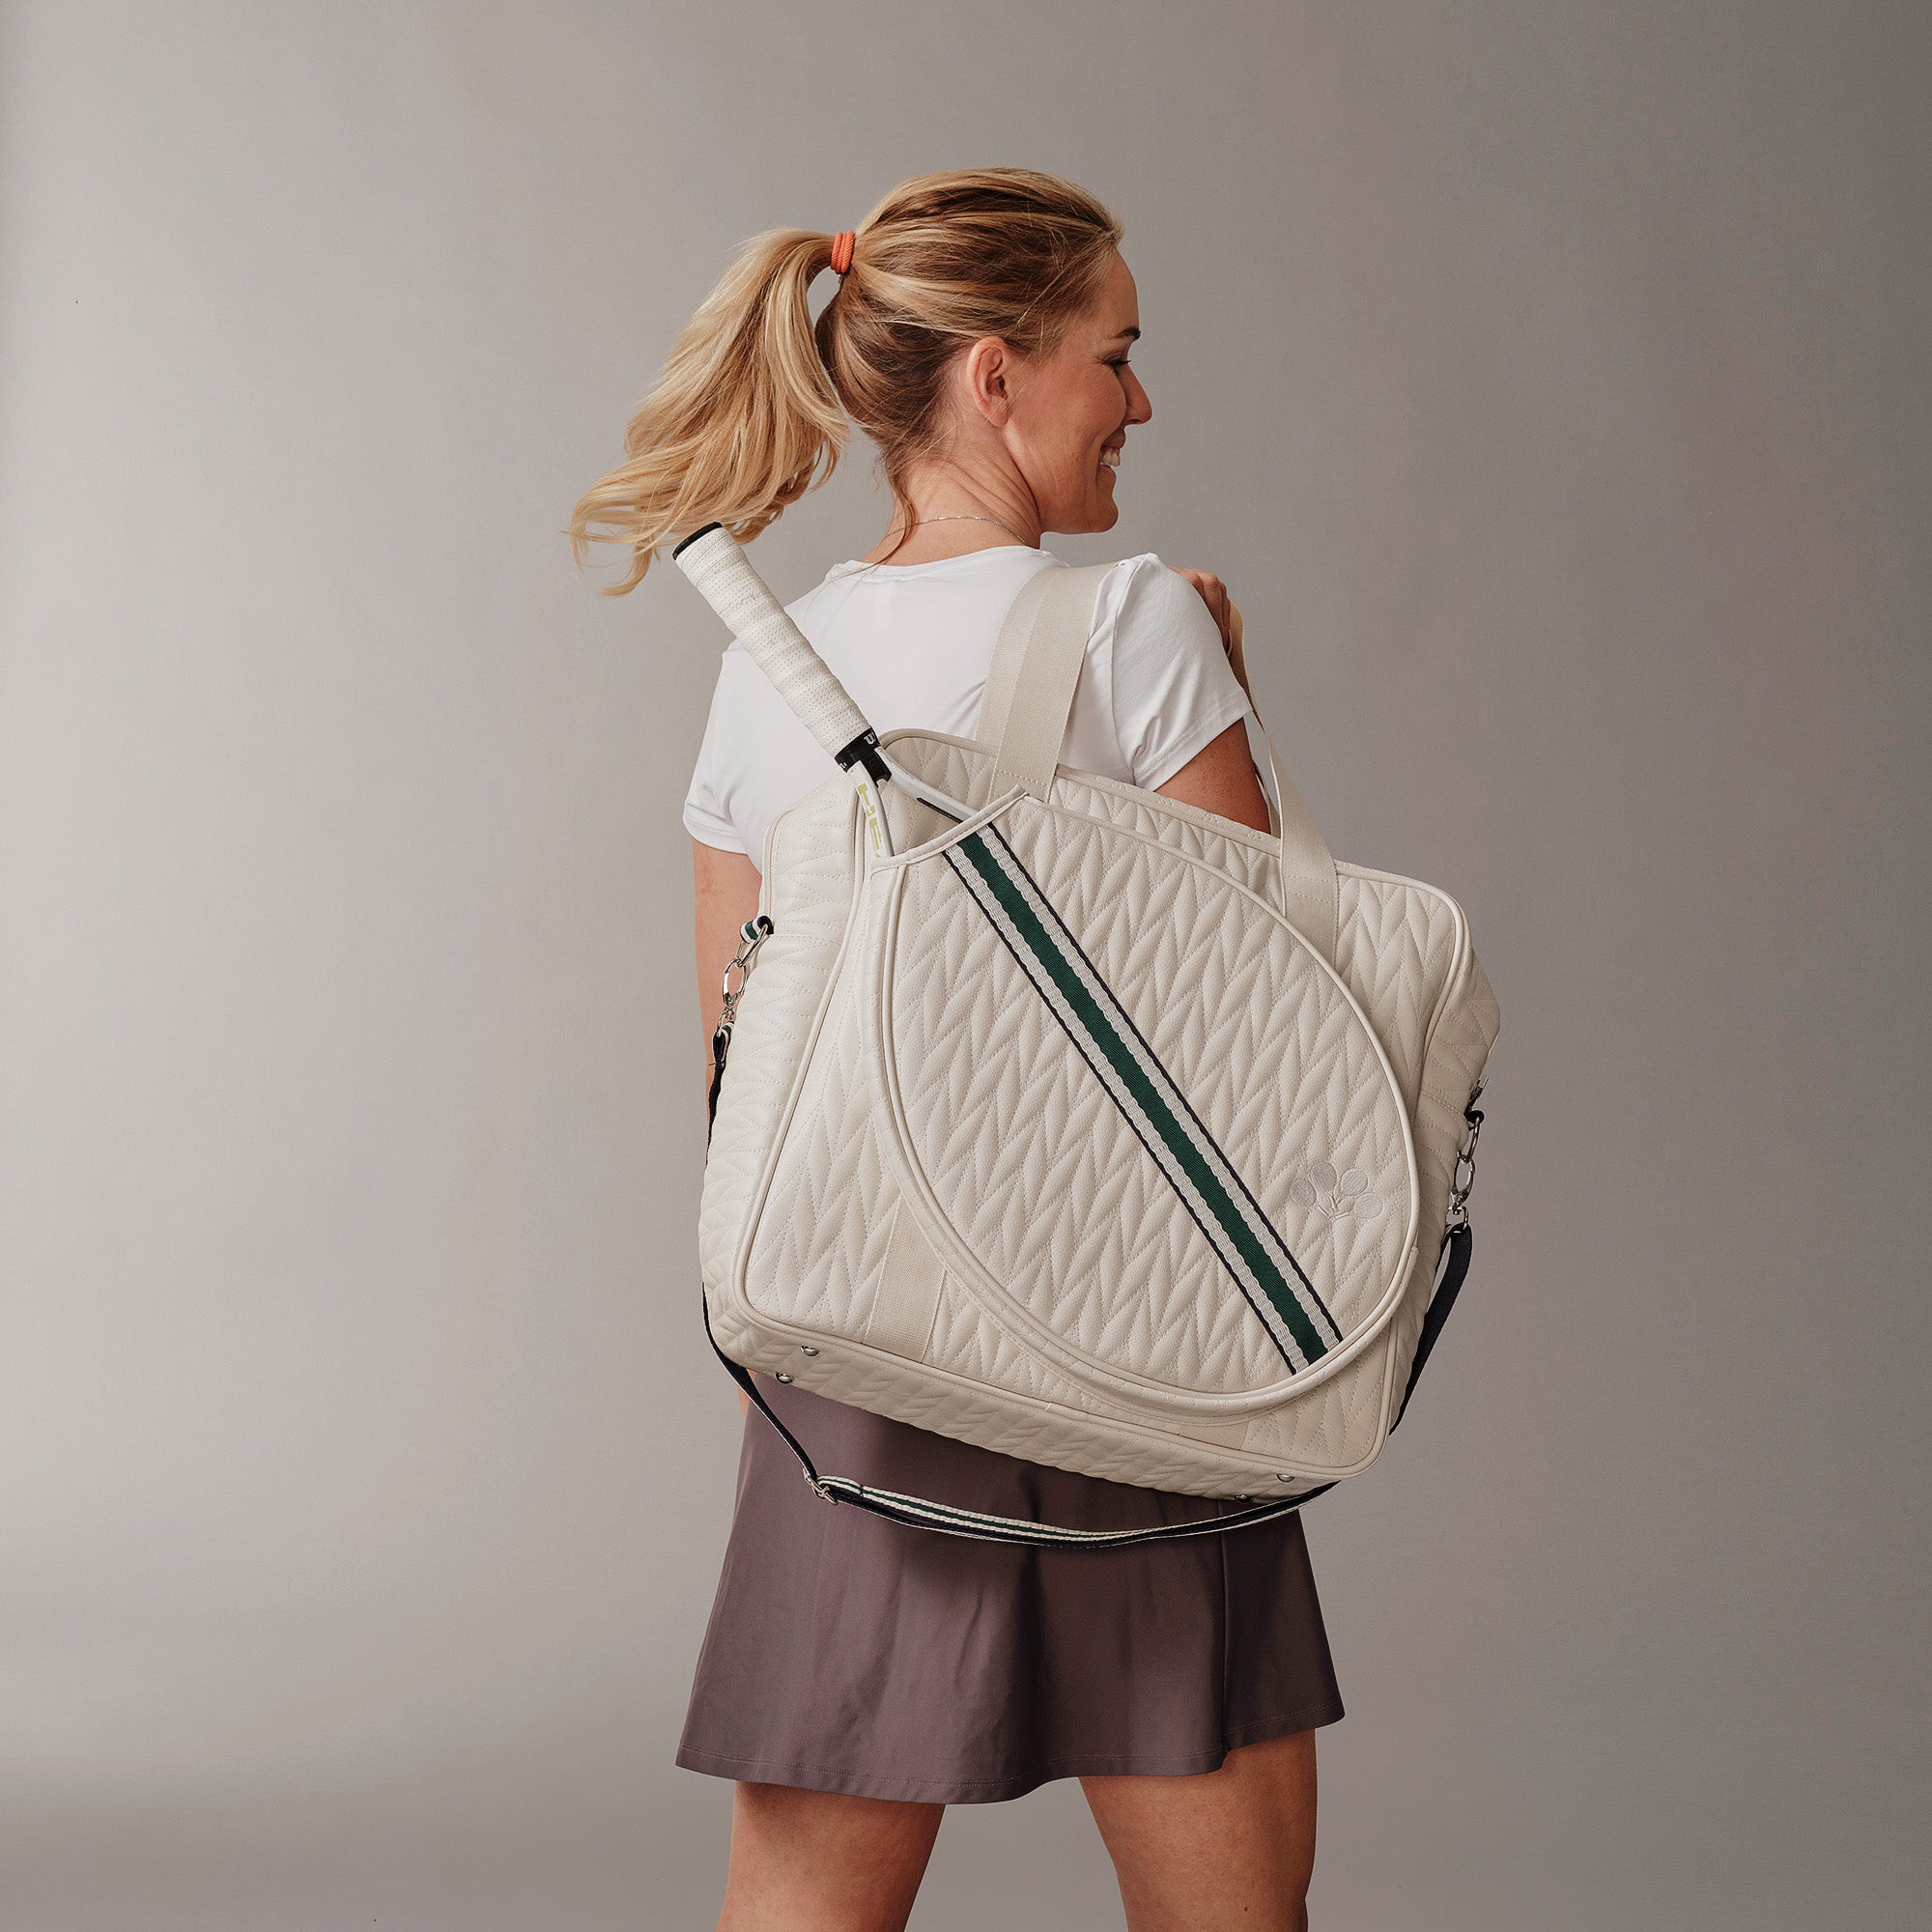 Esserly Tennis Bag in White with Green Webbing